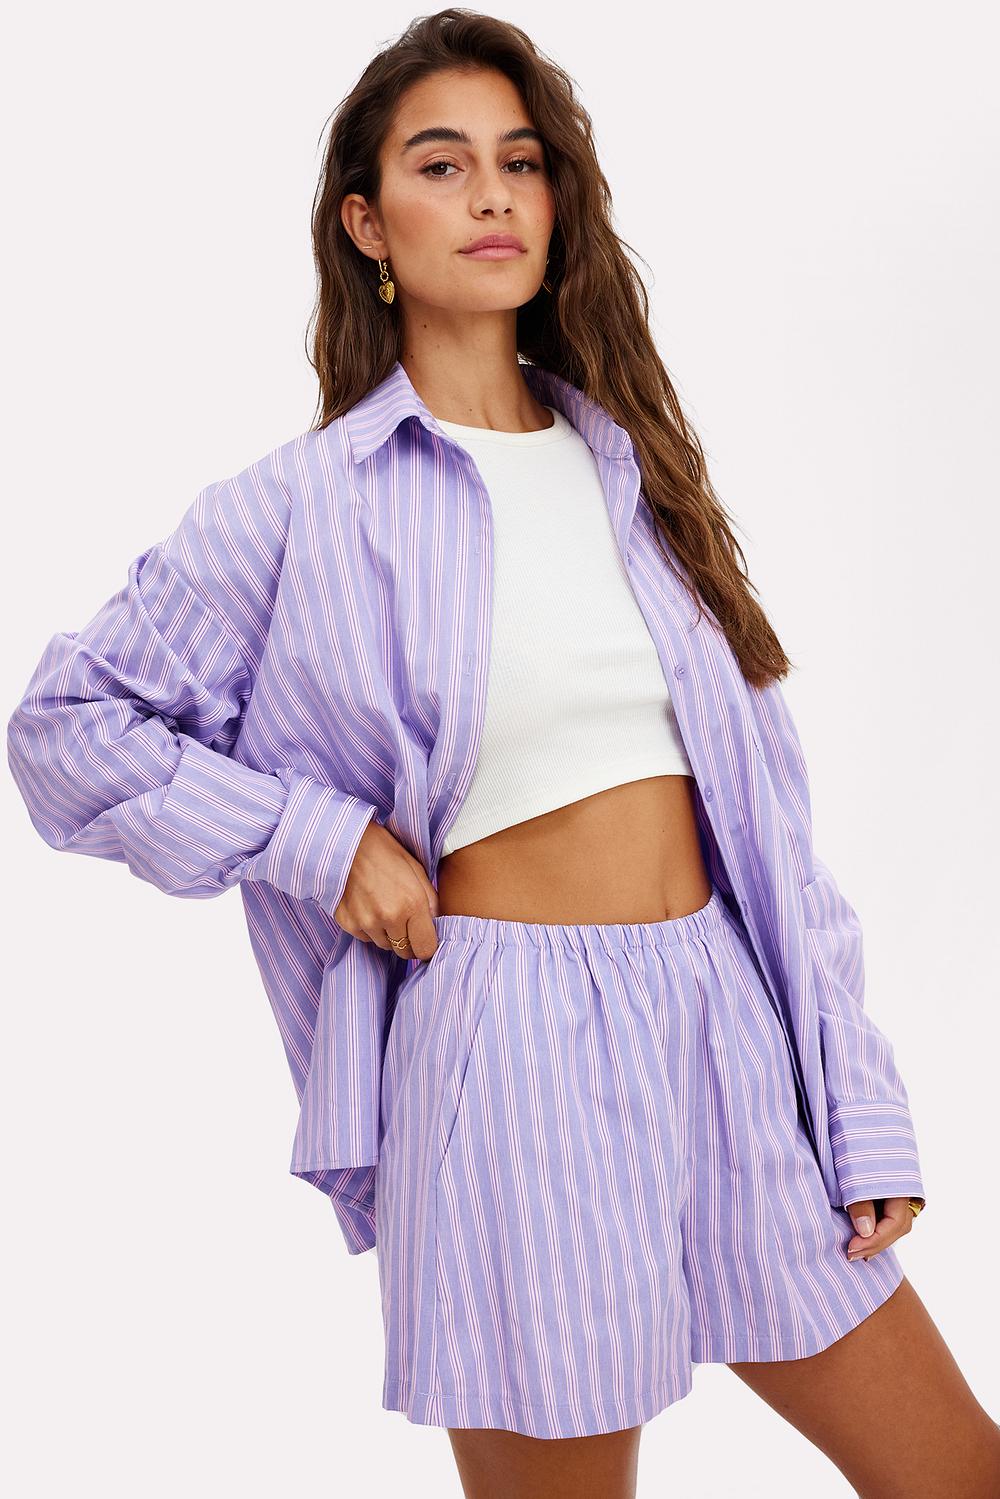 Light purple shorts with stripes